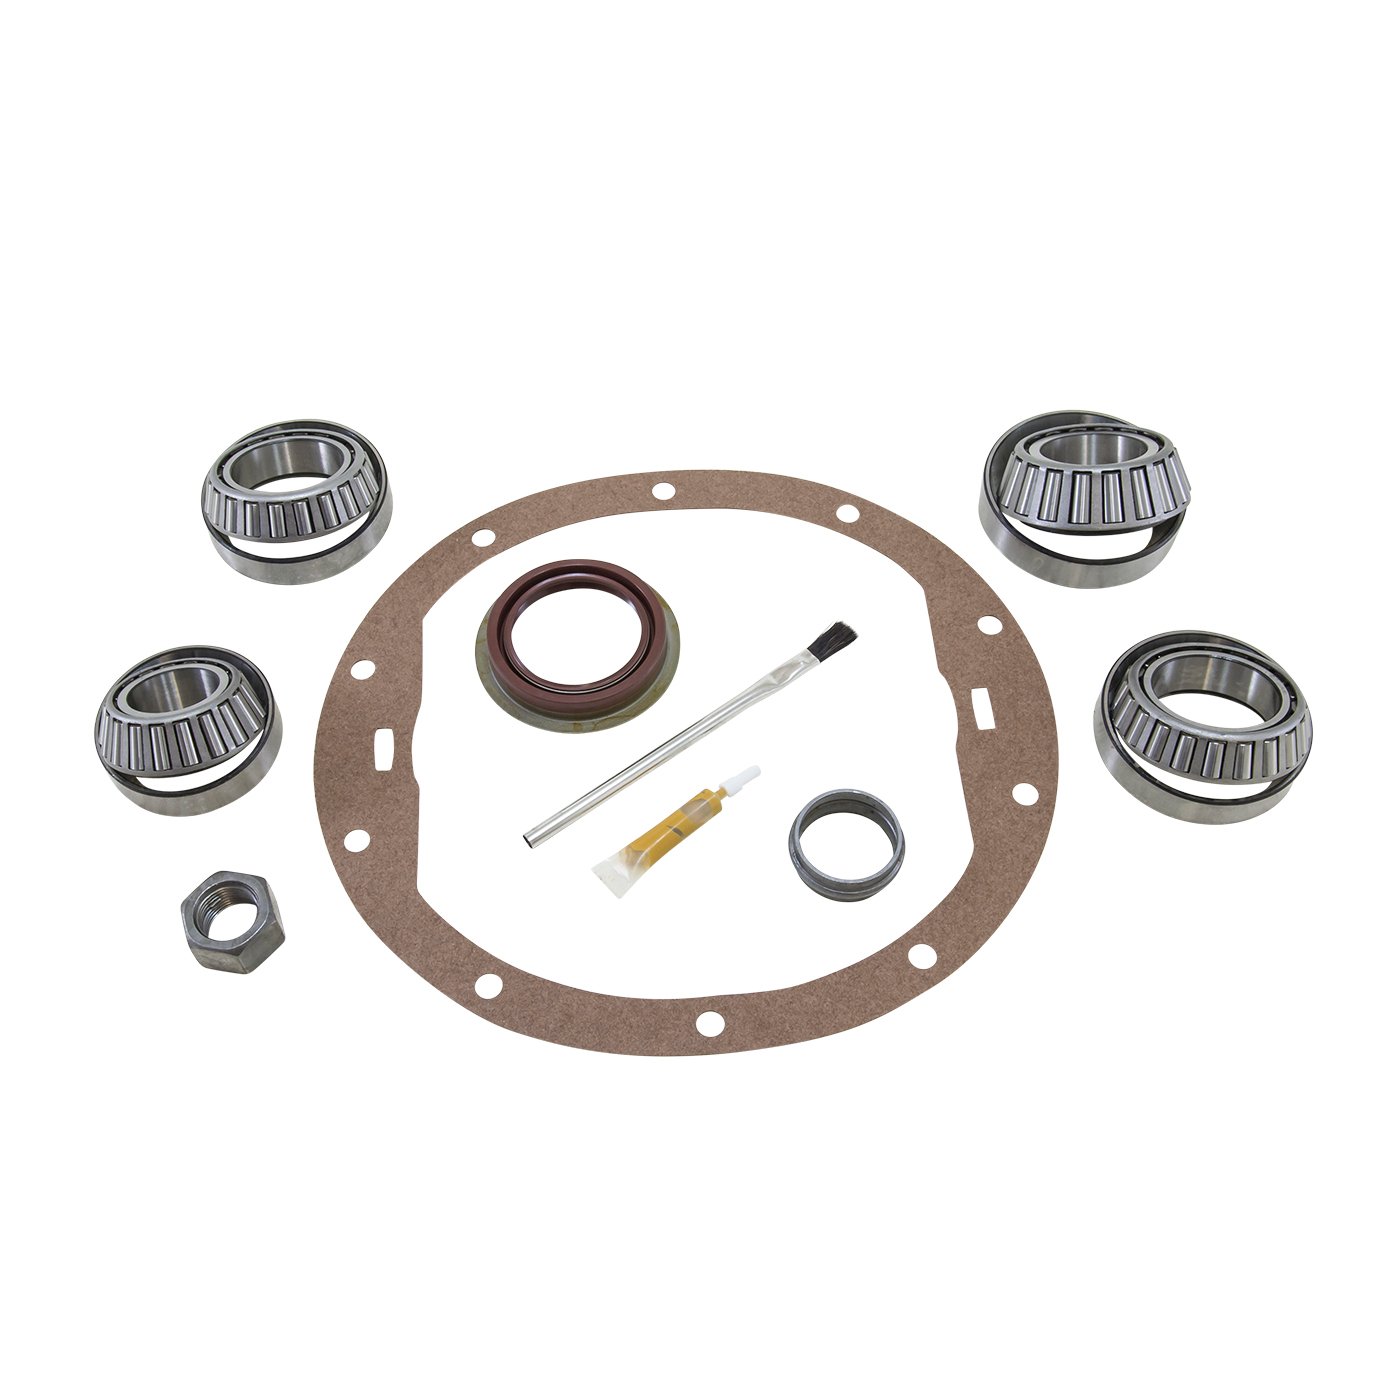 Bearing Installation Kit For 1970-2003 GM 8.5" Differential